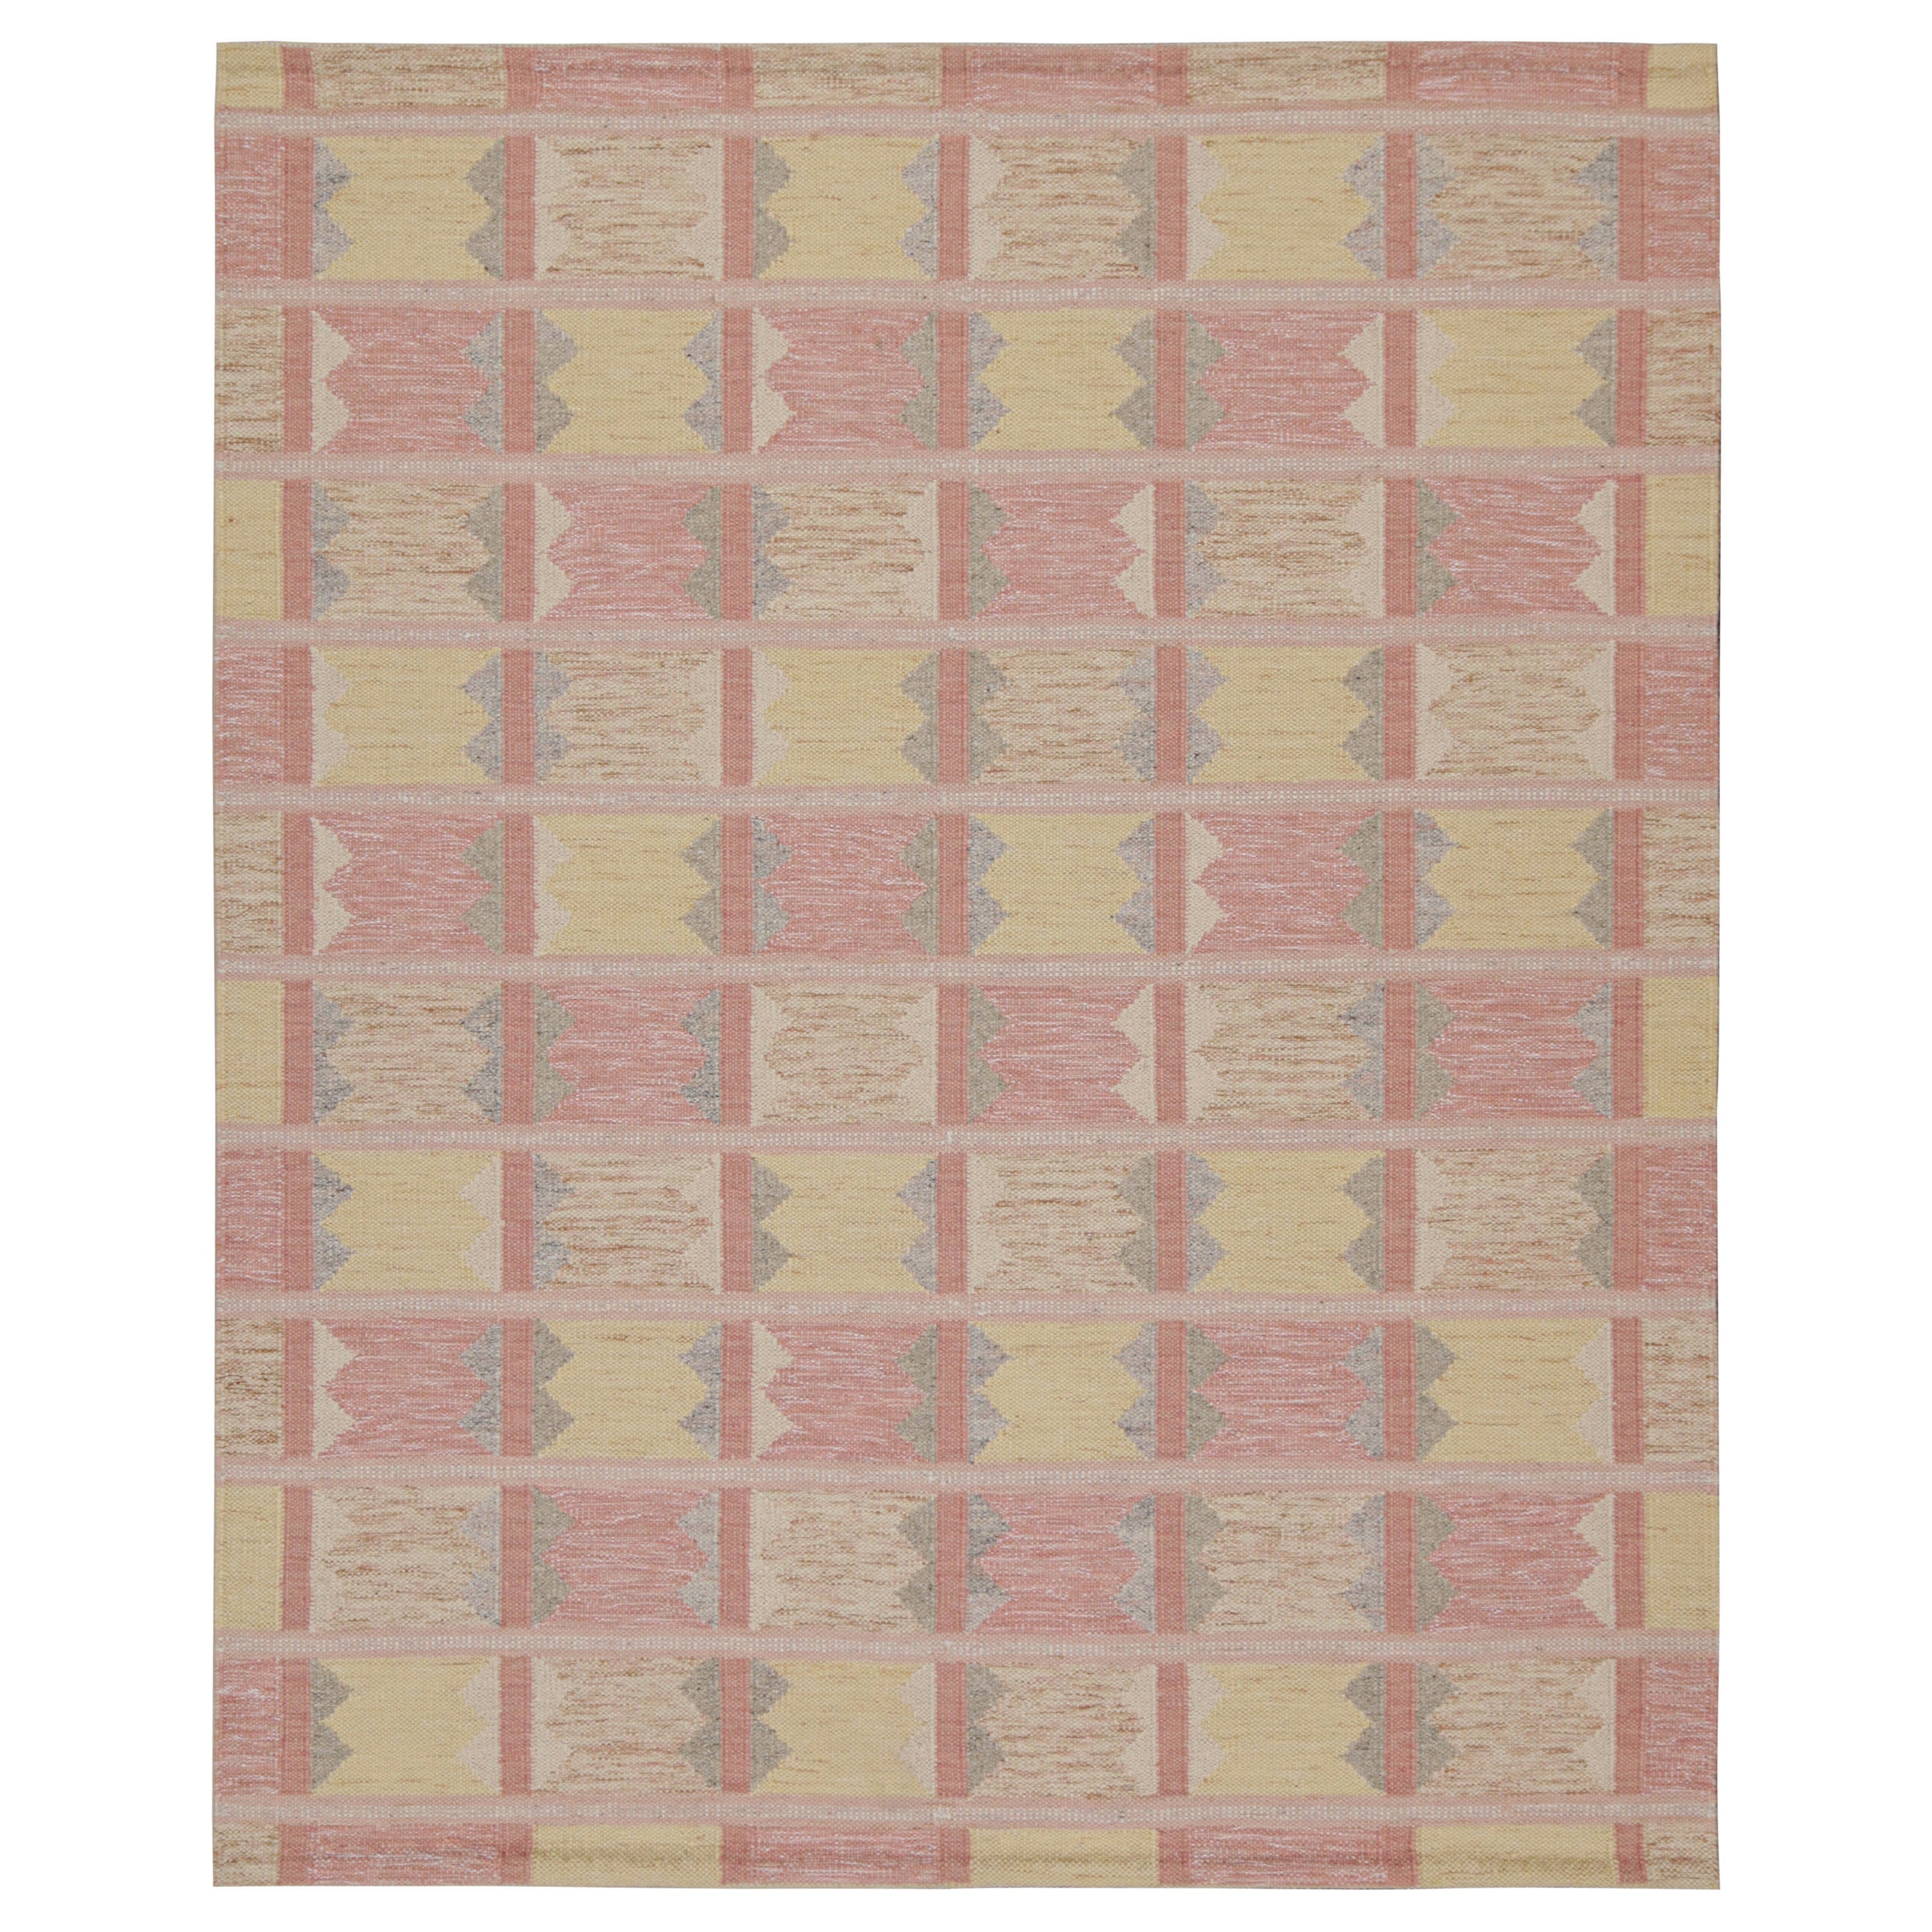 Rug & Kilim’s Scandinavian Style Kilim in Cream and Pink Geometric Patterns For Sale